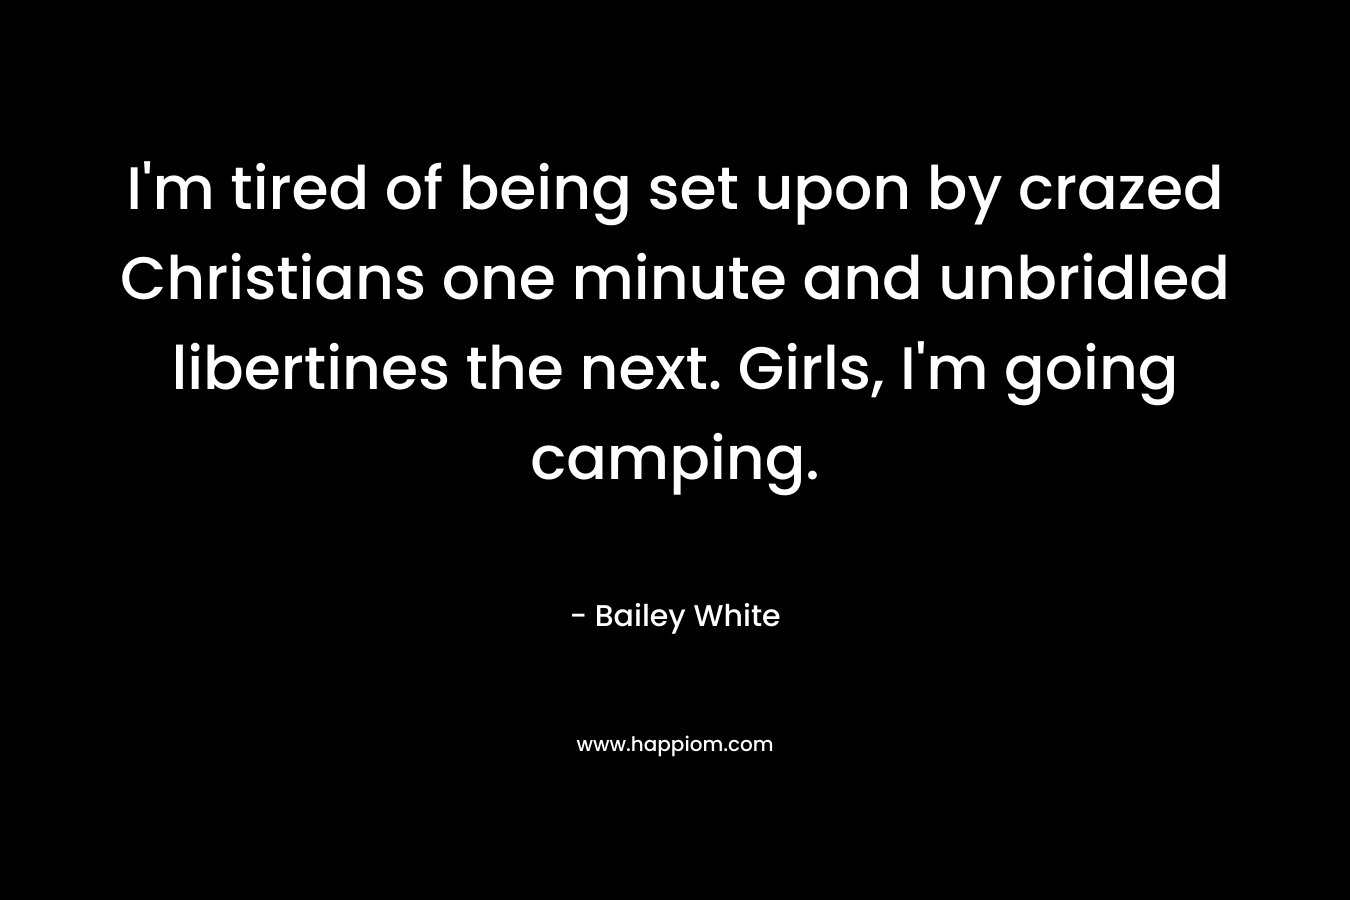 I’m tired of being set upon by crazed Christians one minute and unbridled libertines the next. Girls, I’m going camping. – Bailey White